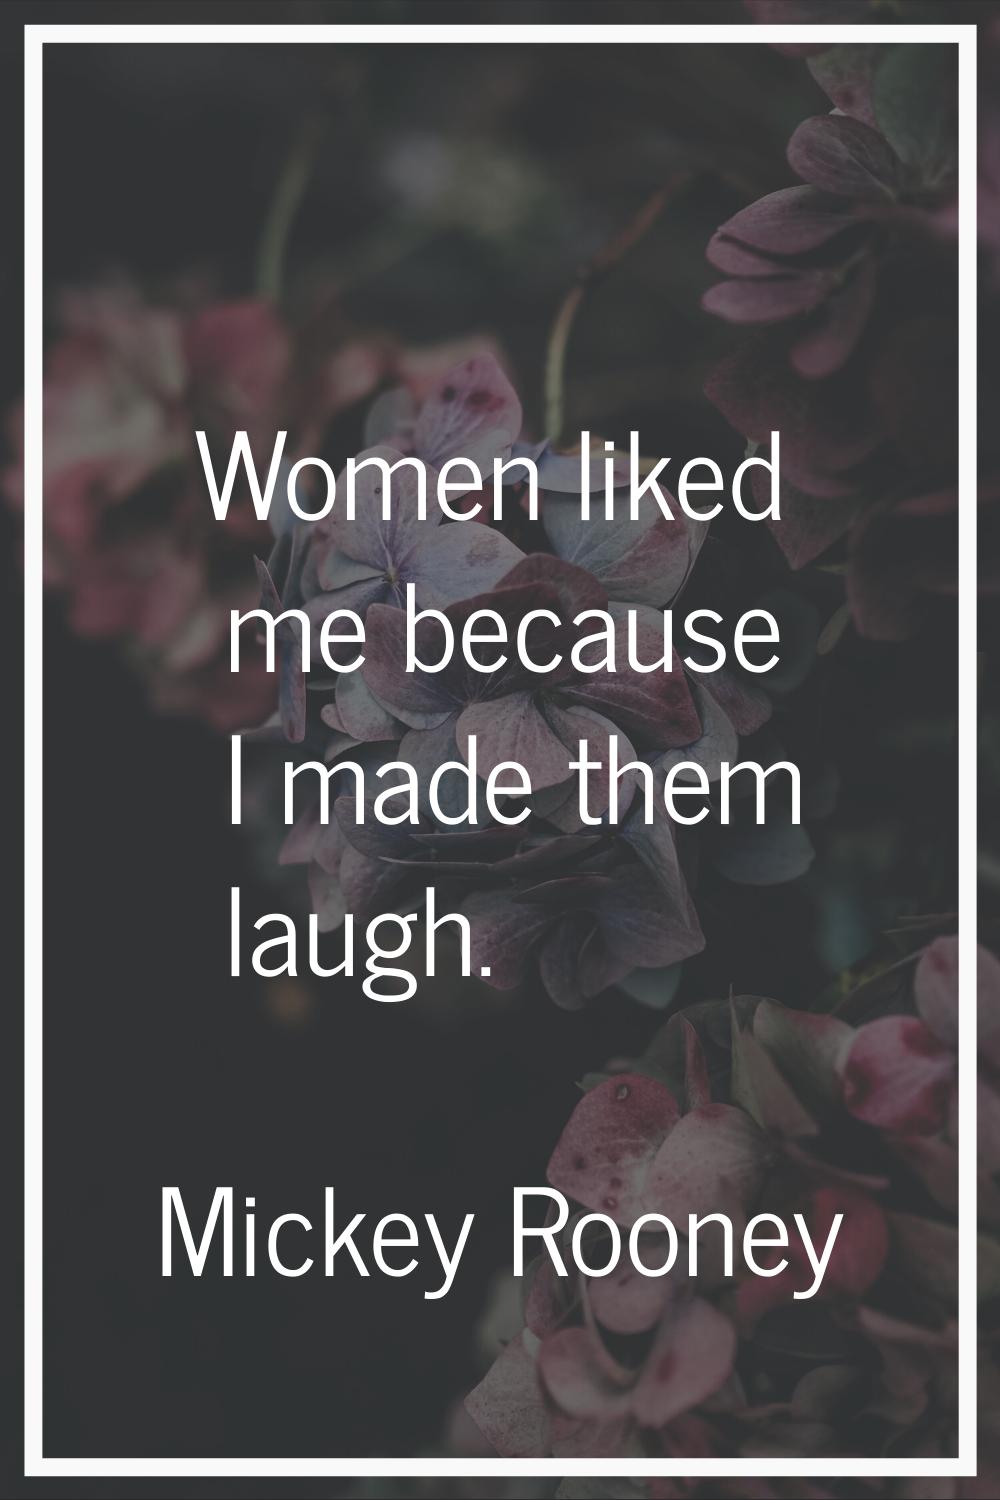 Women liked me because I made them laugh.